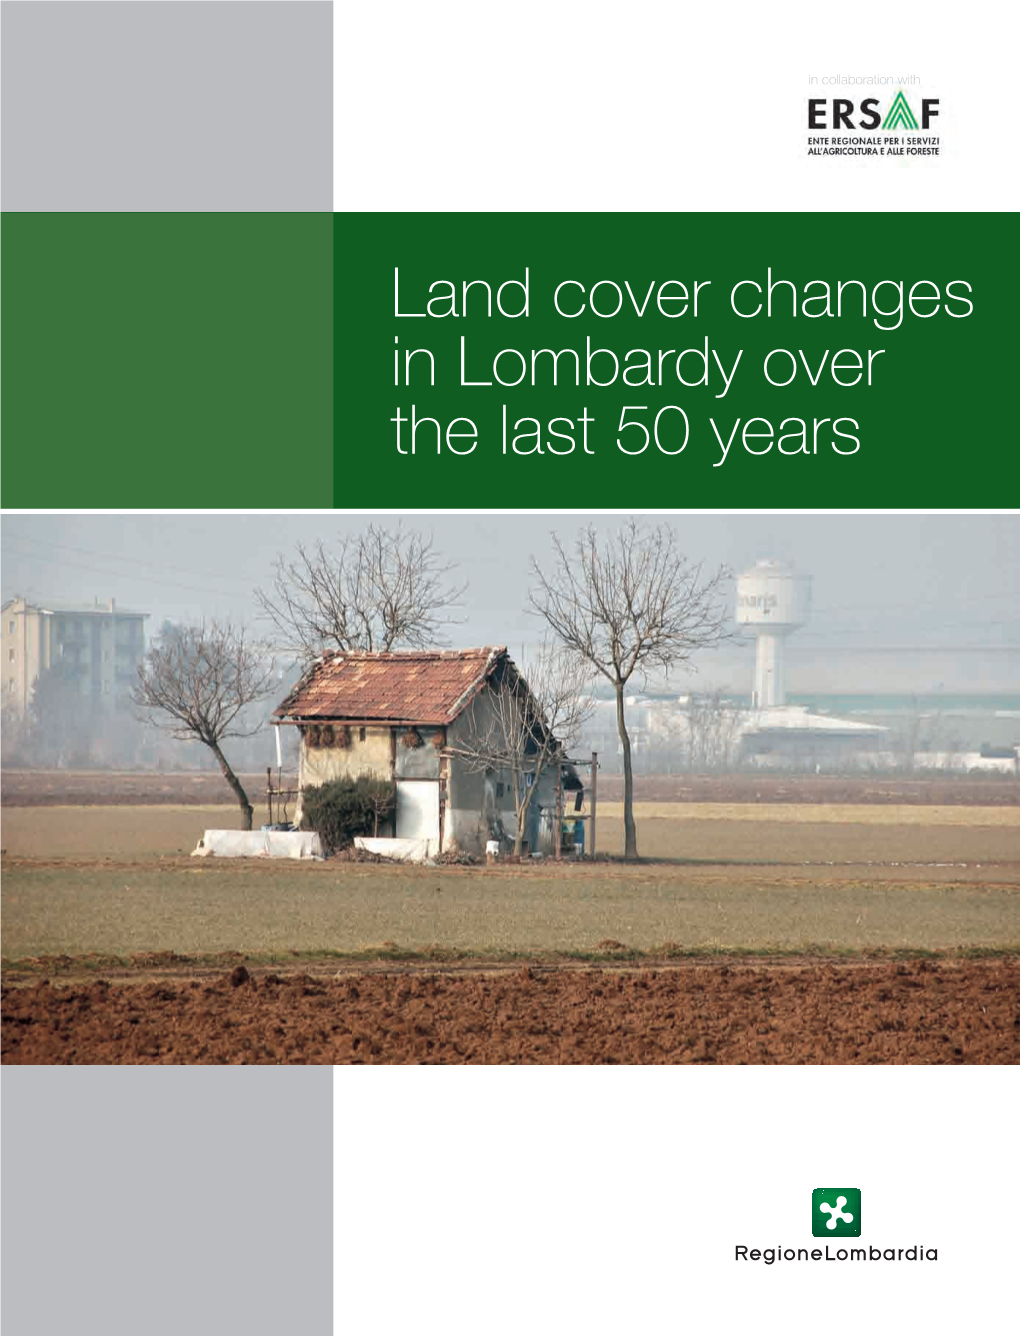 Land Cover Changes in Lombardy Over the Last 50 Years Land Cover Changes in Lombardy Over the Last 50 Years Lombardy Region the Lombard Forest Landscape